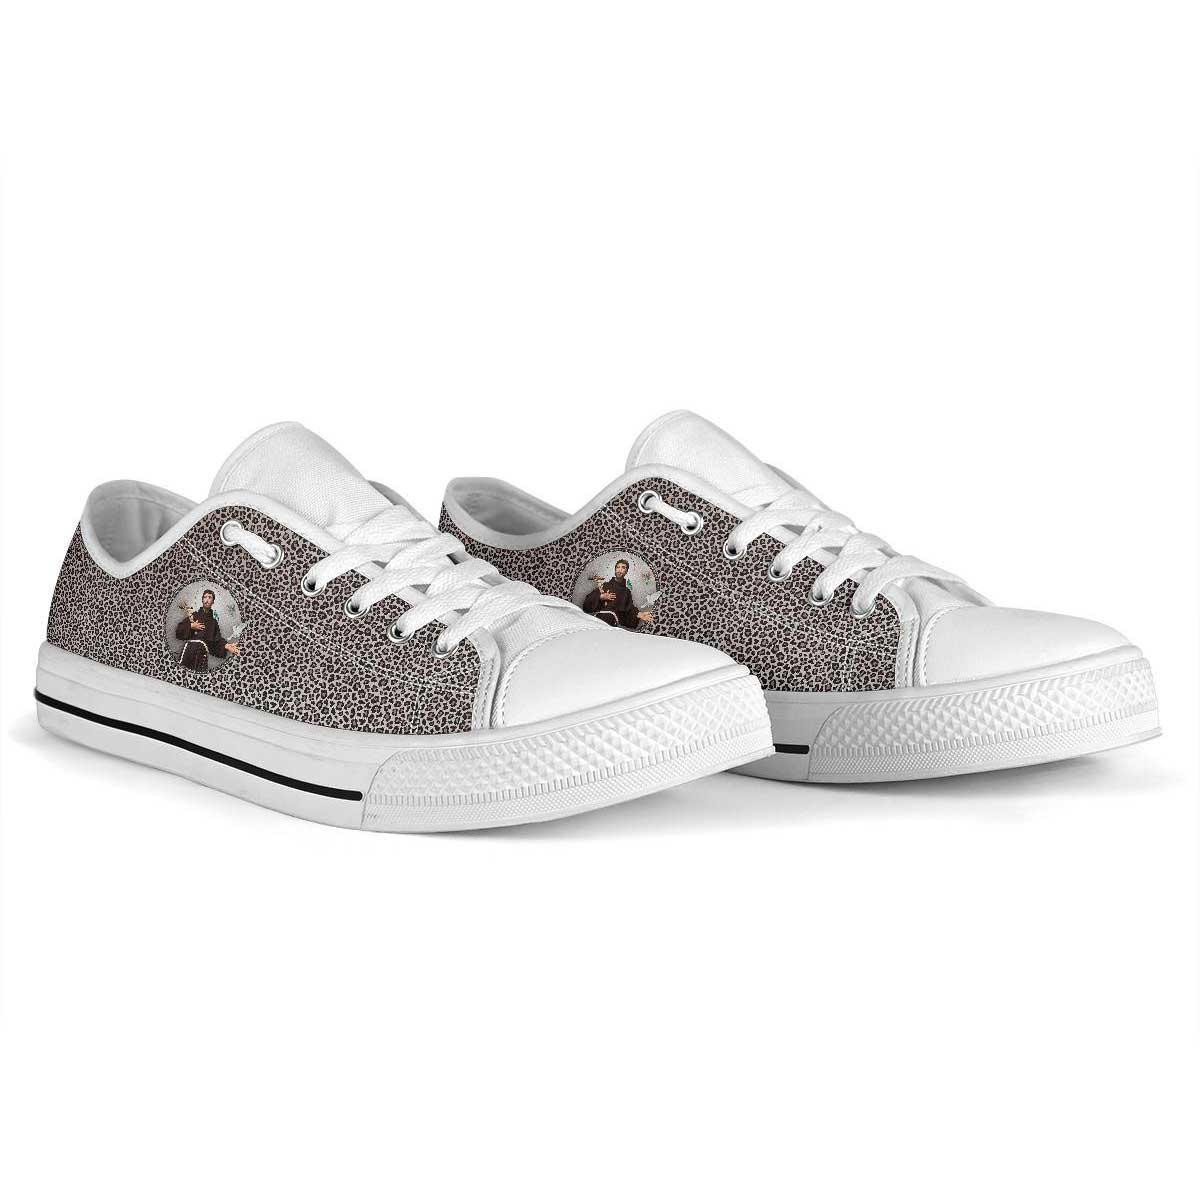 St. Francis of Assisi Women's Canvas Low Top Shoes (Leopard)